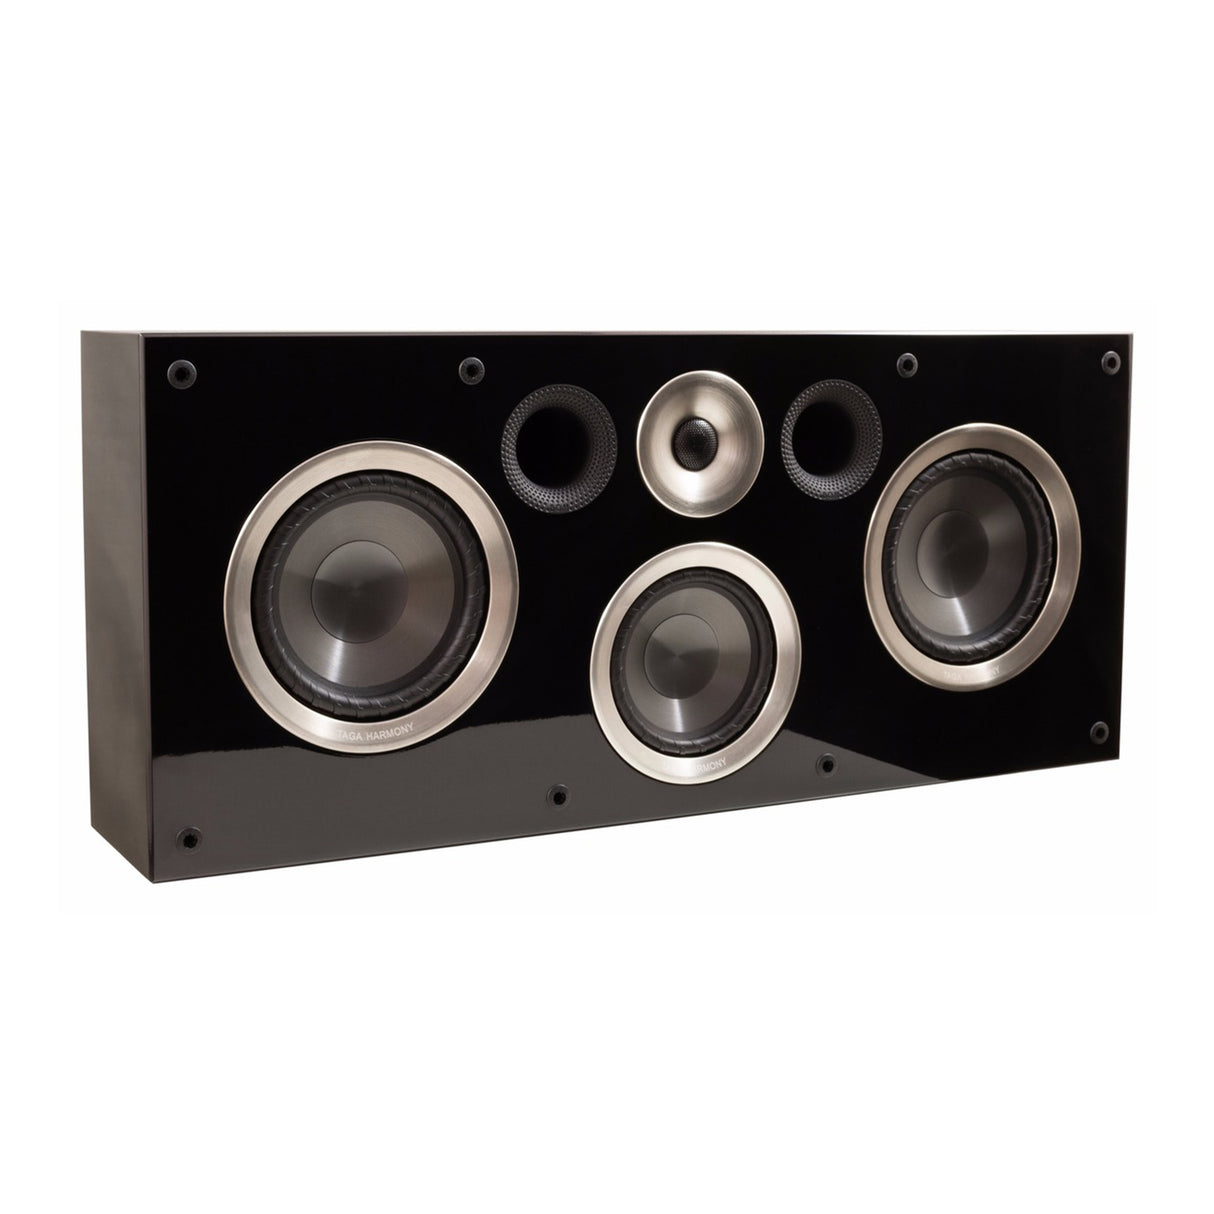 TAGA HARMONY-AZURE OW-80 LCRS-LCR Speakers (Each)